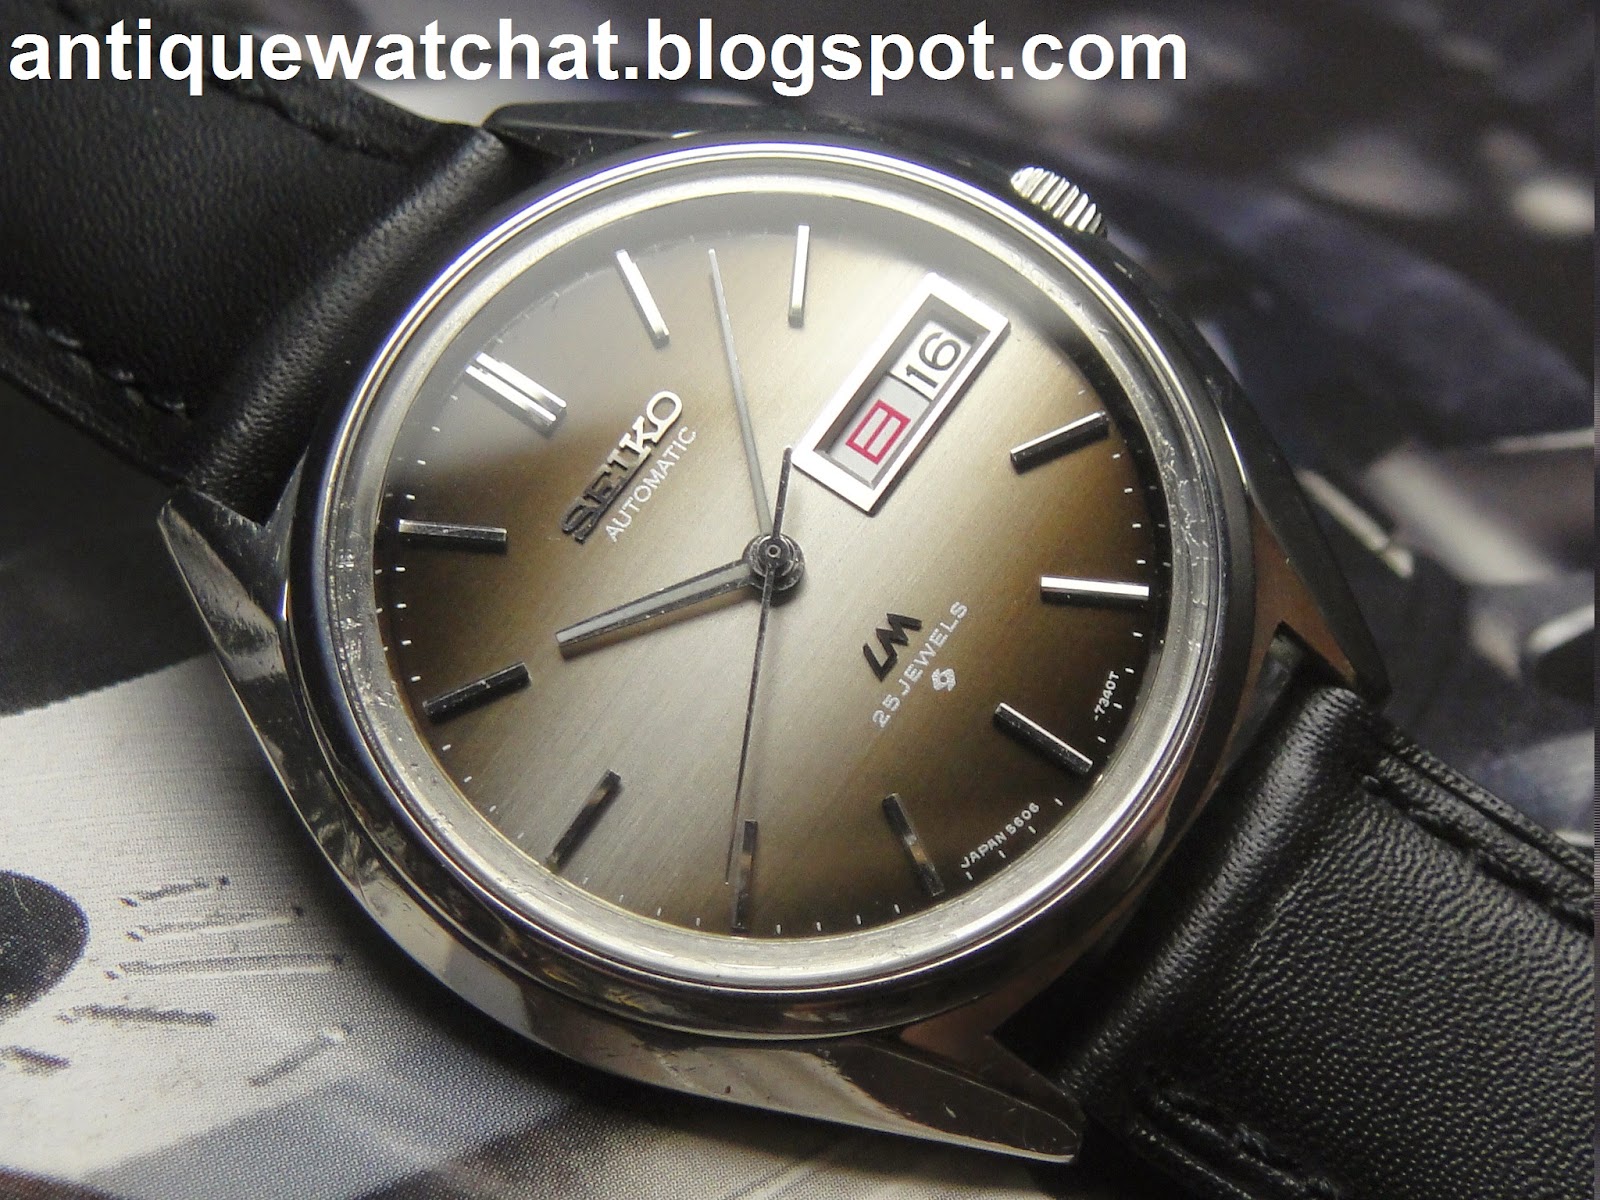 Antique Watch Bar: SEIKO LORD MATIC 5606-7190 SL55 (SOLD)